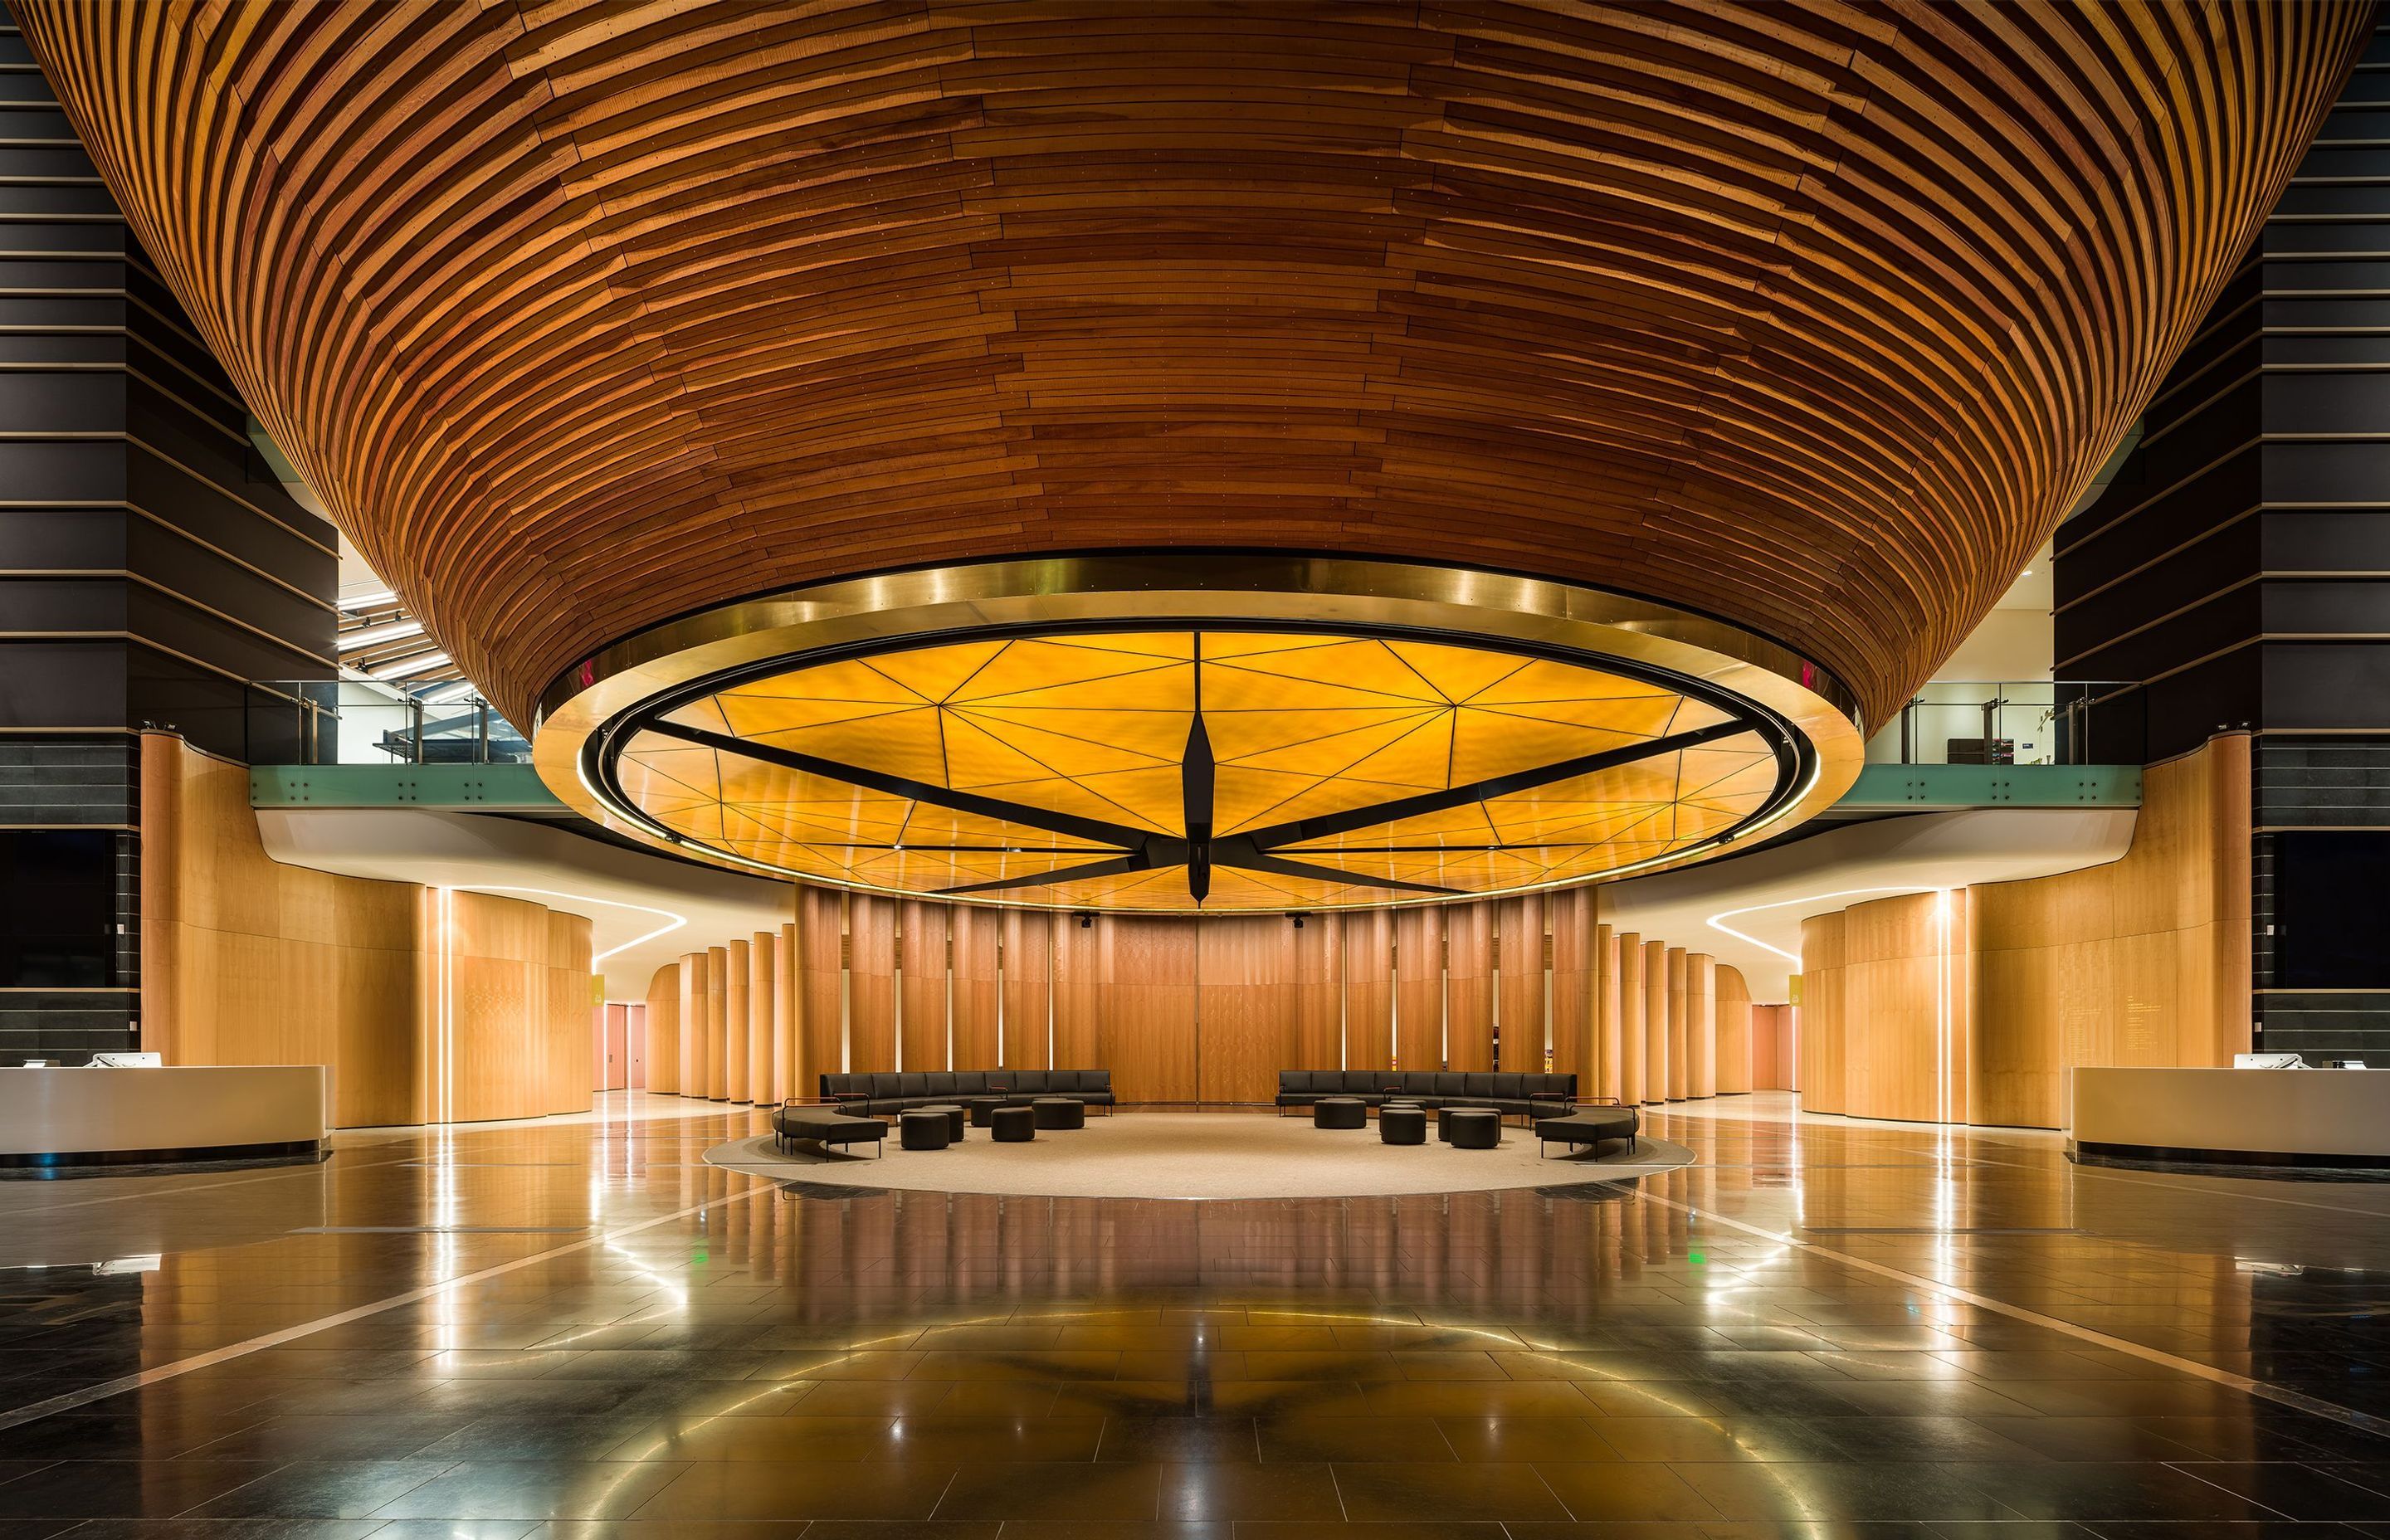 The Noel Lane-designed Tanoa (kava bowl) at the centre of the Auckland War Memorial Museum's refurbished South Atrium, a project carried out in conjunction with Jasmax, Design Tribe, Salmond Reed Architects and Australian firm FJMT.